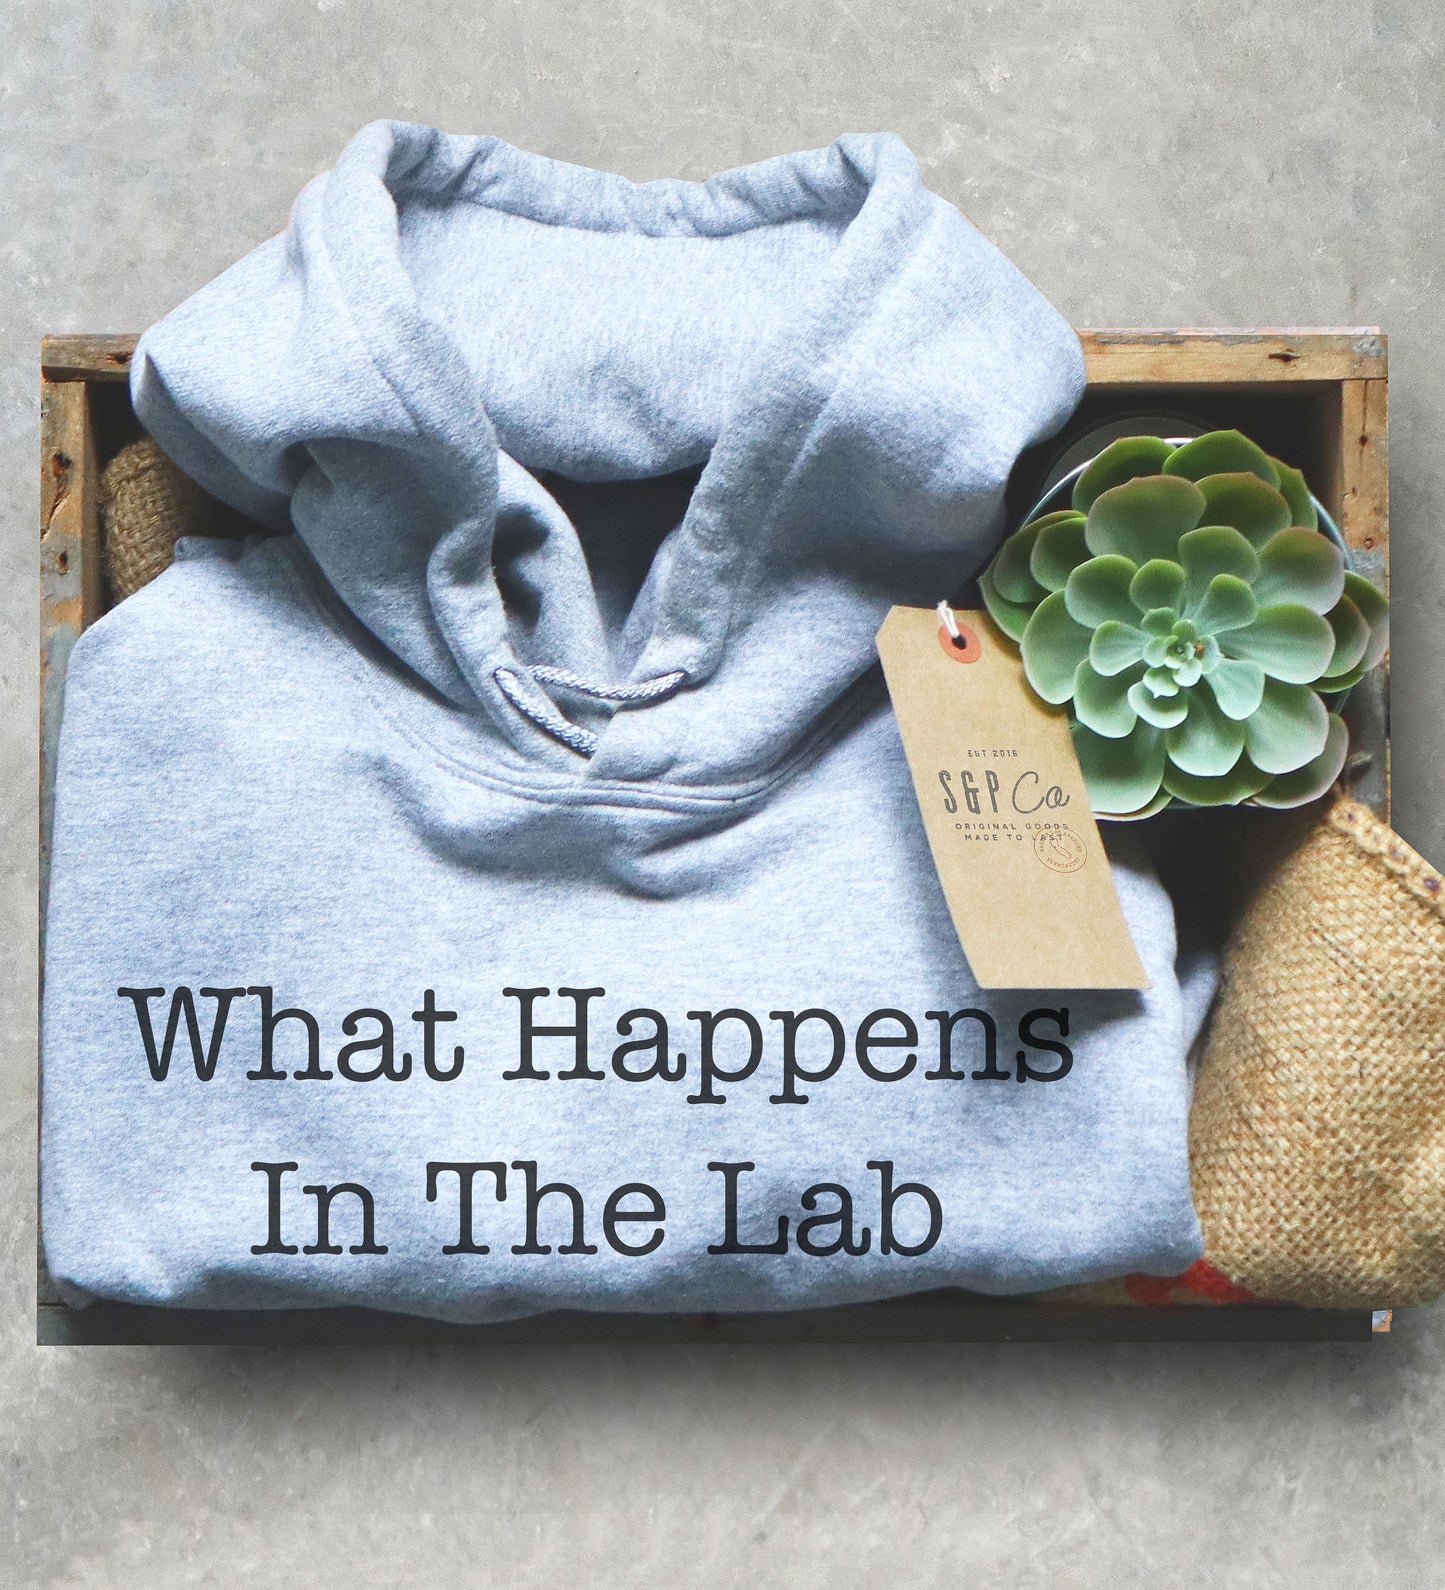 What Happens In The Lab Stays In The Lab Hoodie - Lab Tech Shirt, Technician Shirt, Science Shirt, Scientist Shirt, Science Gift, Lab Shirt